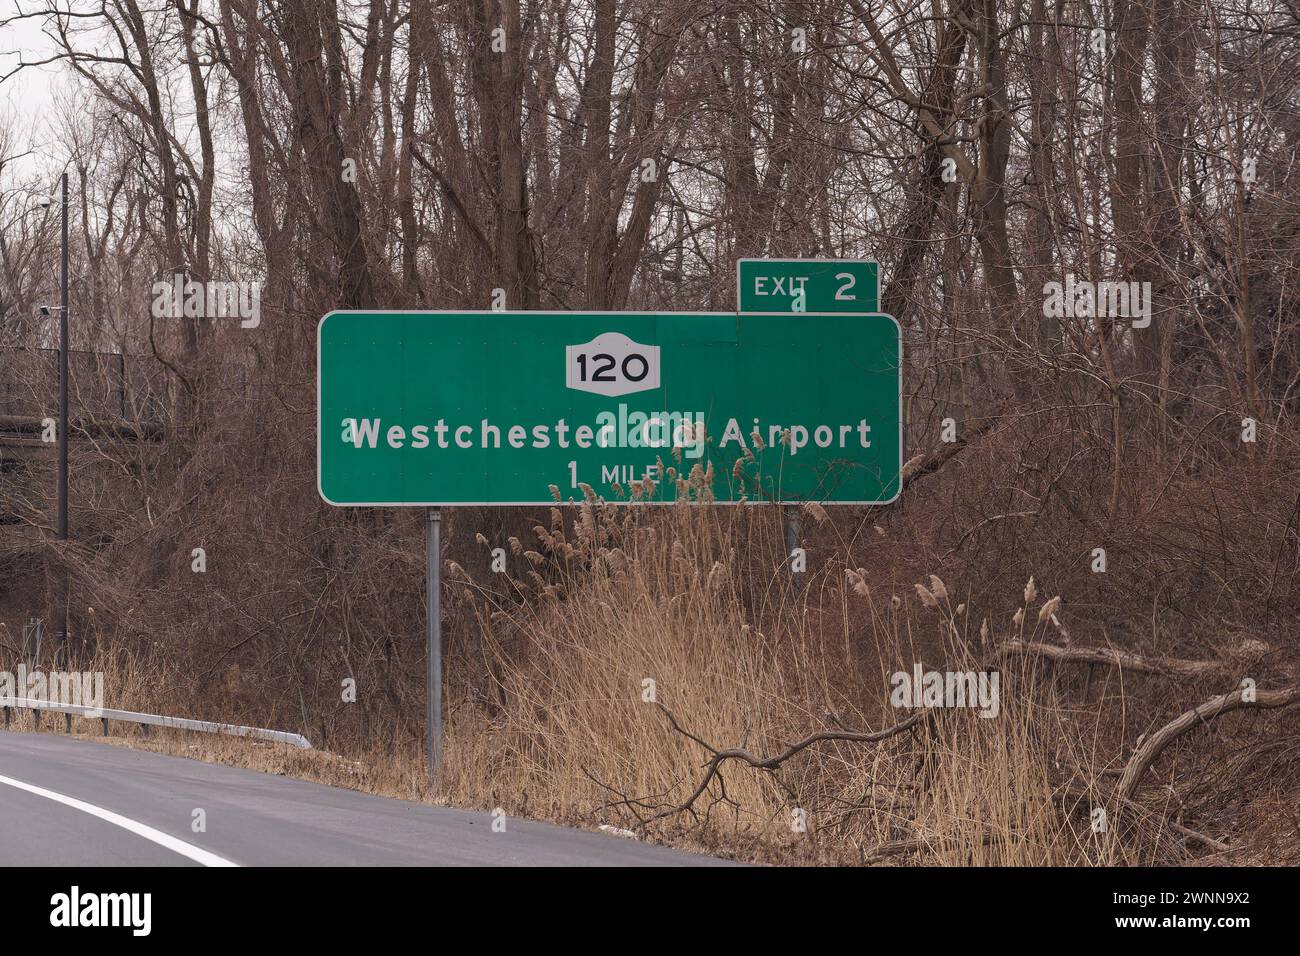 exit 2 sign on I-684 for NY-120 and Westchester County Airport. Westchester County Airport is a county-owned airport in Westchester County, New York Stock Photo